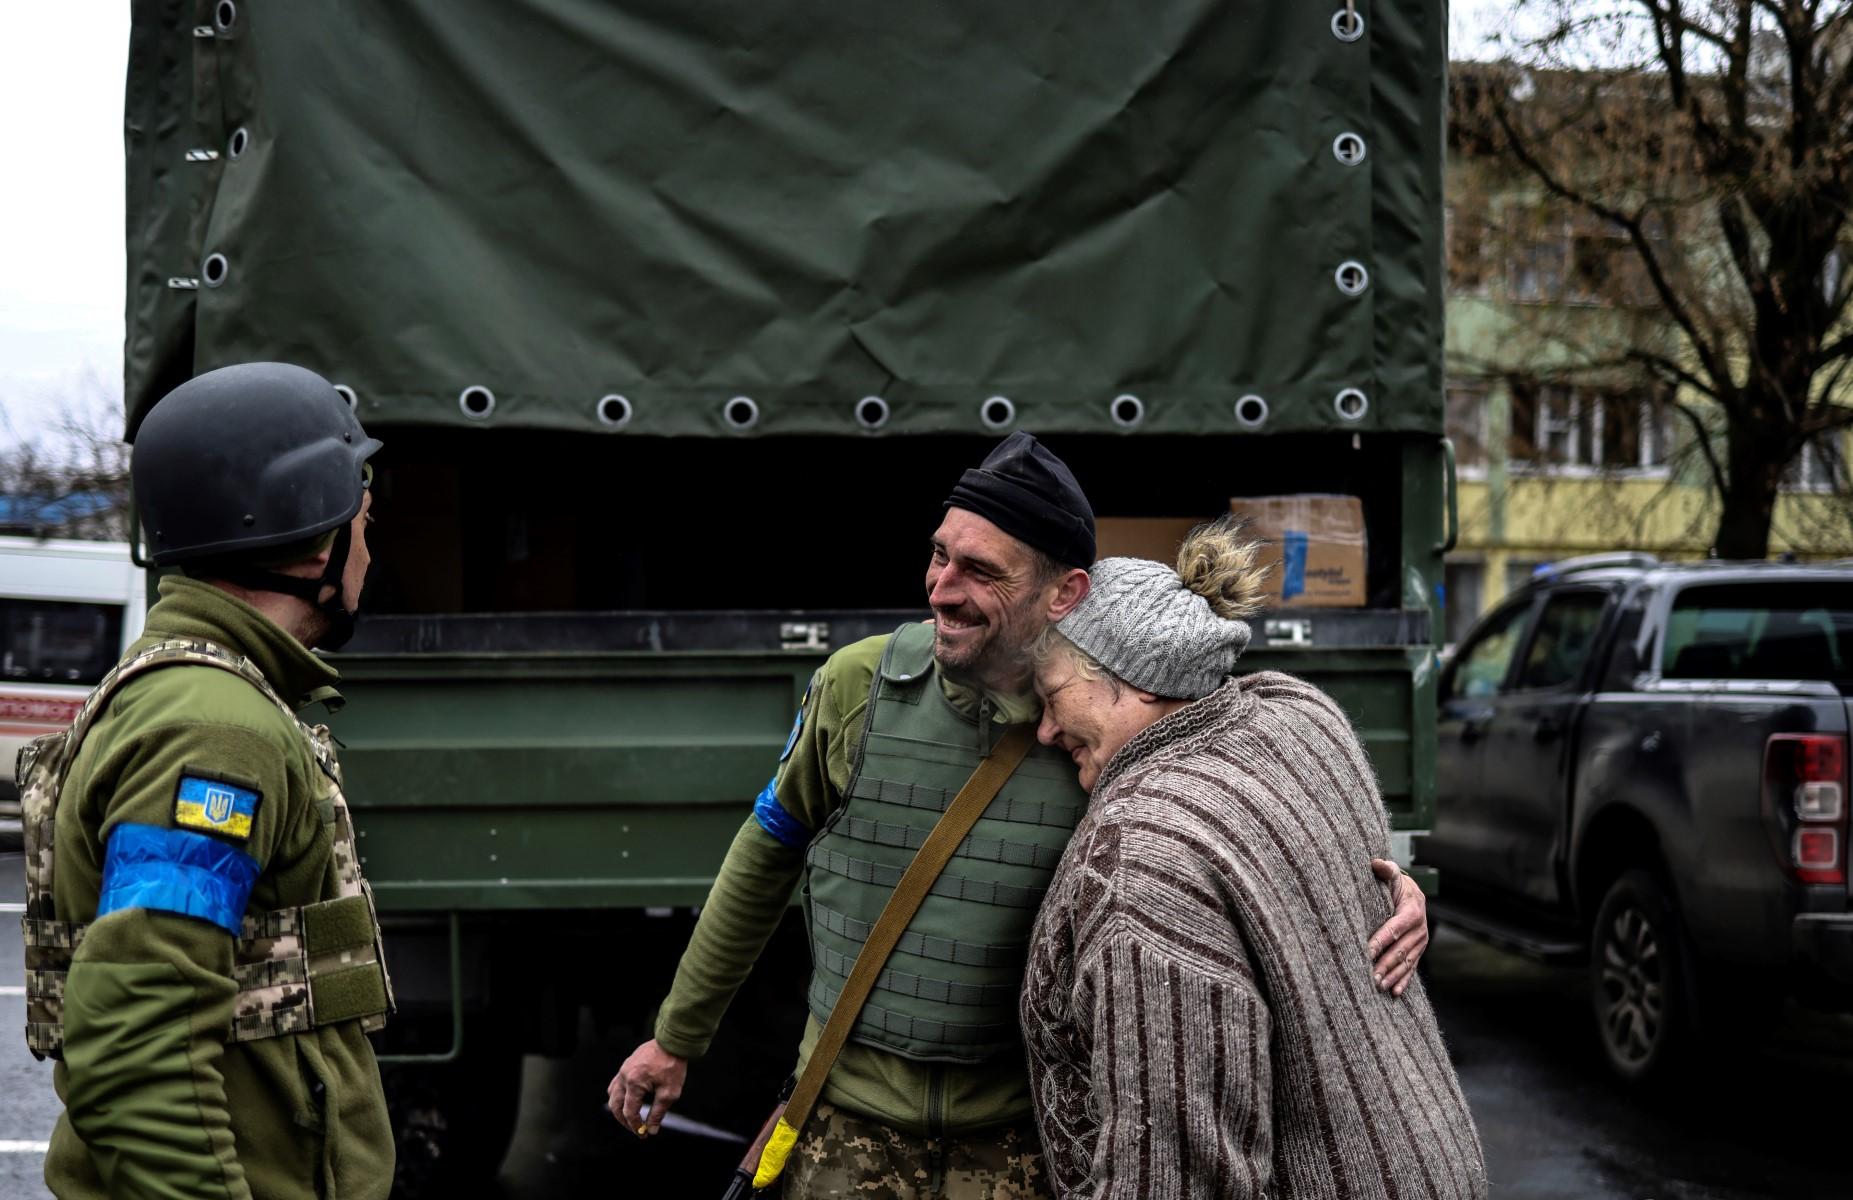 An elderly woman embraces an Ukranian soldier in Bucha, northwest of Kyiv, on April 2. Photo: AFP